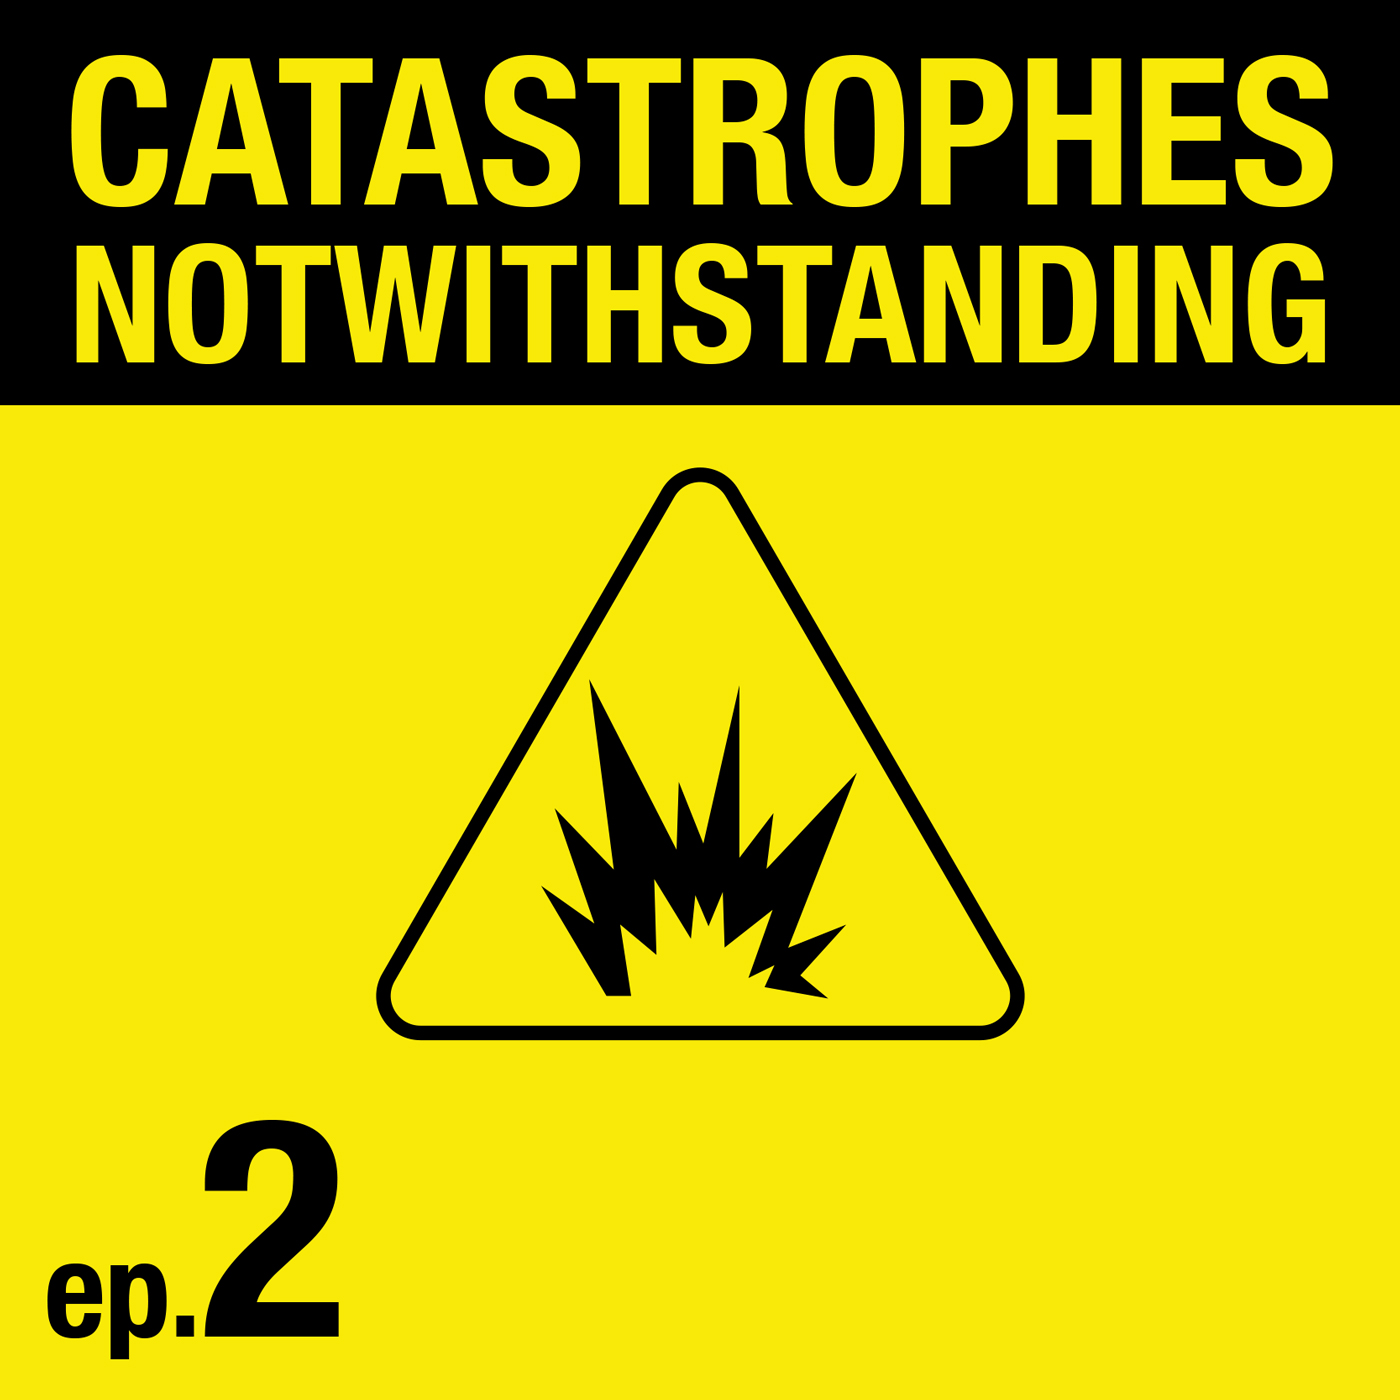 Cover Image of Catastrophes Notwithstanding Episode 2